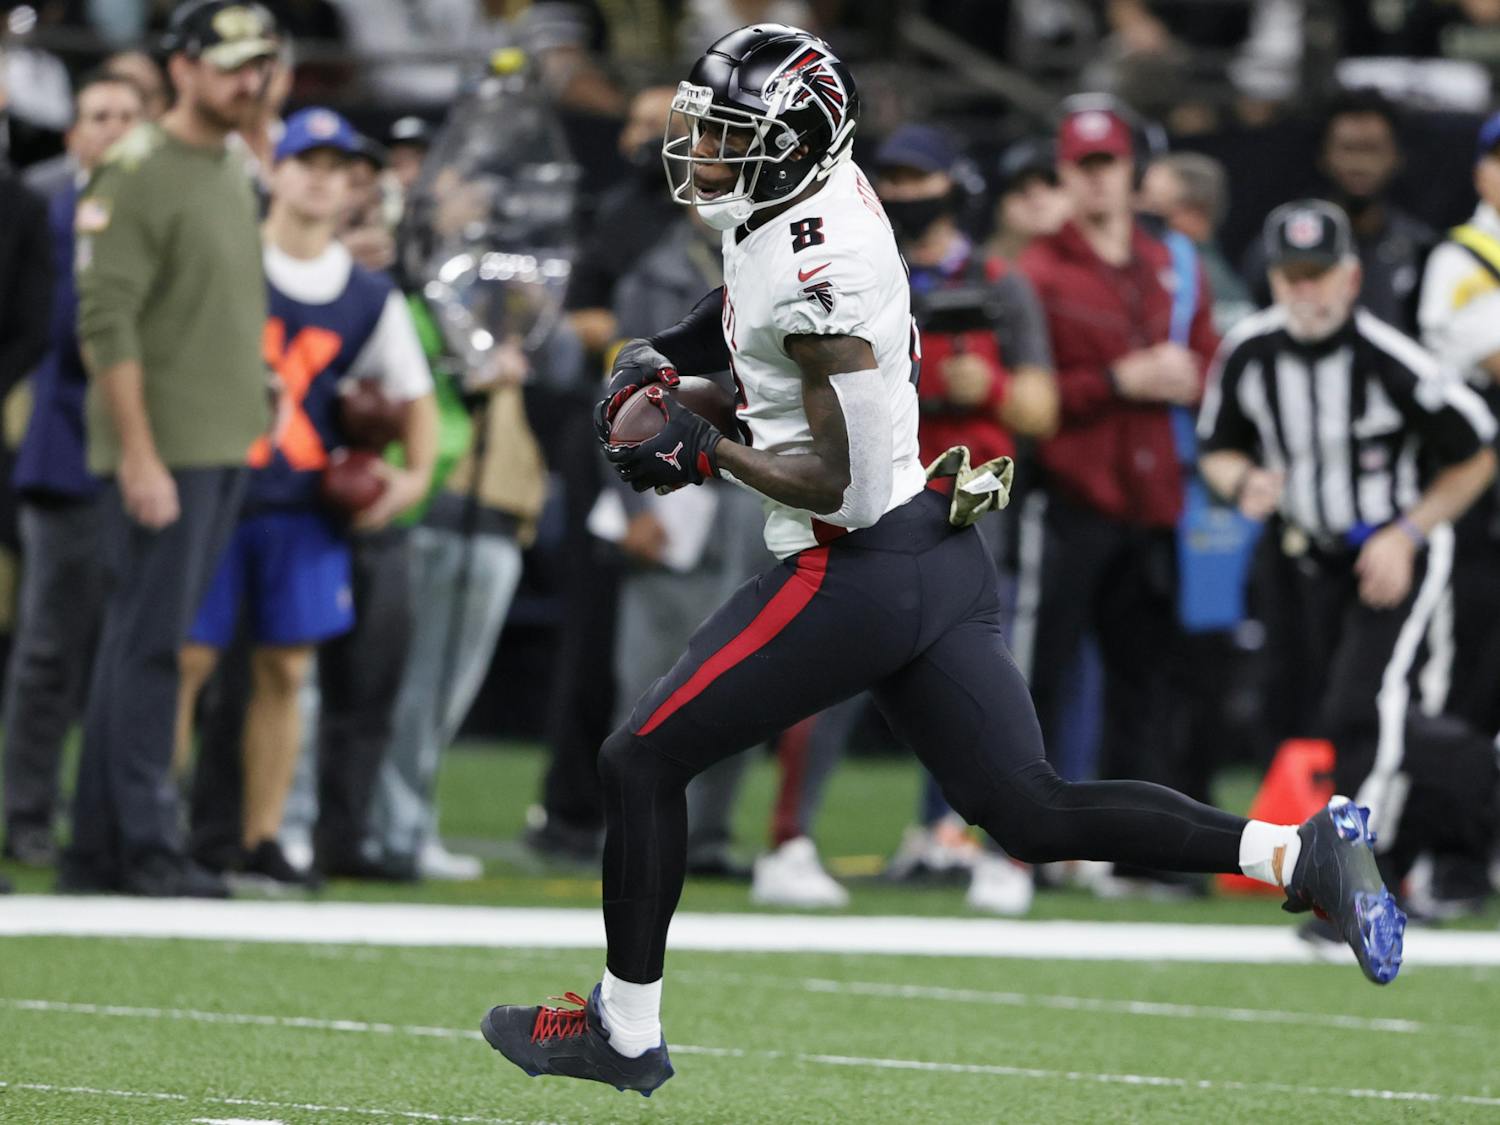 Atlanta Falcons tight end Kyle Pitts (8) runs against the New Orleans Saints during the first half of an NFL football game, Sunday, Nov. 7, 2021, in New Orleans. (AP Photo/Butch Dill)